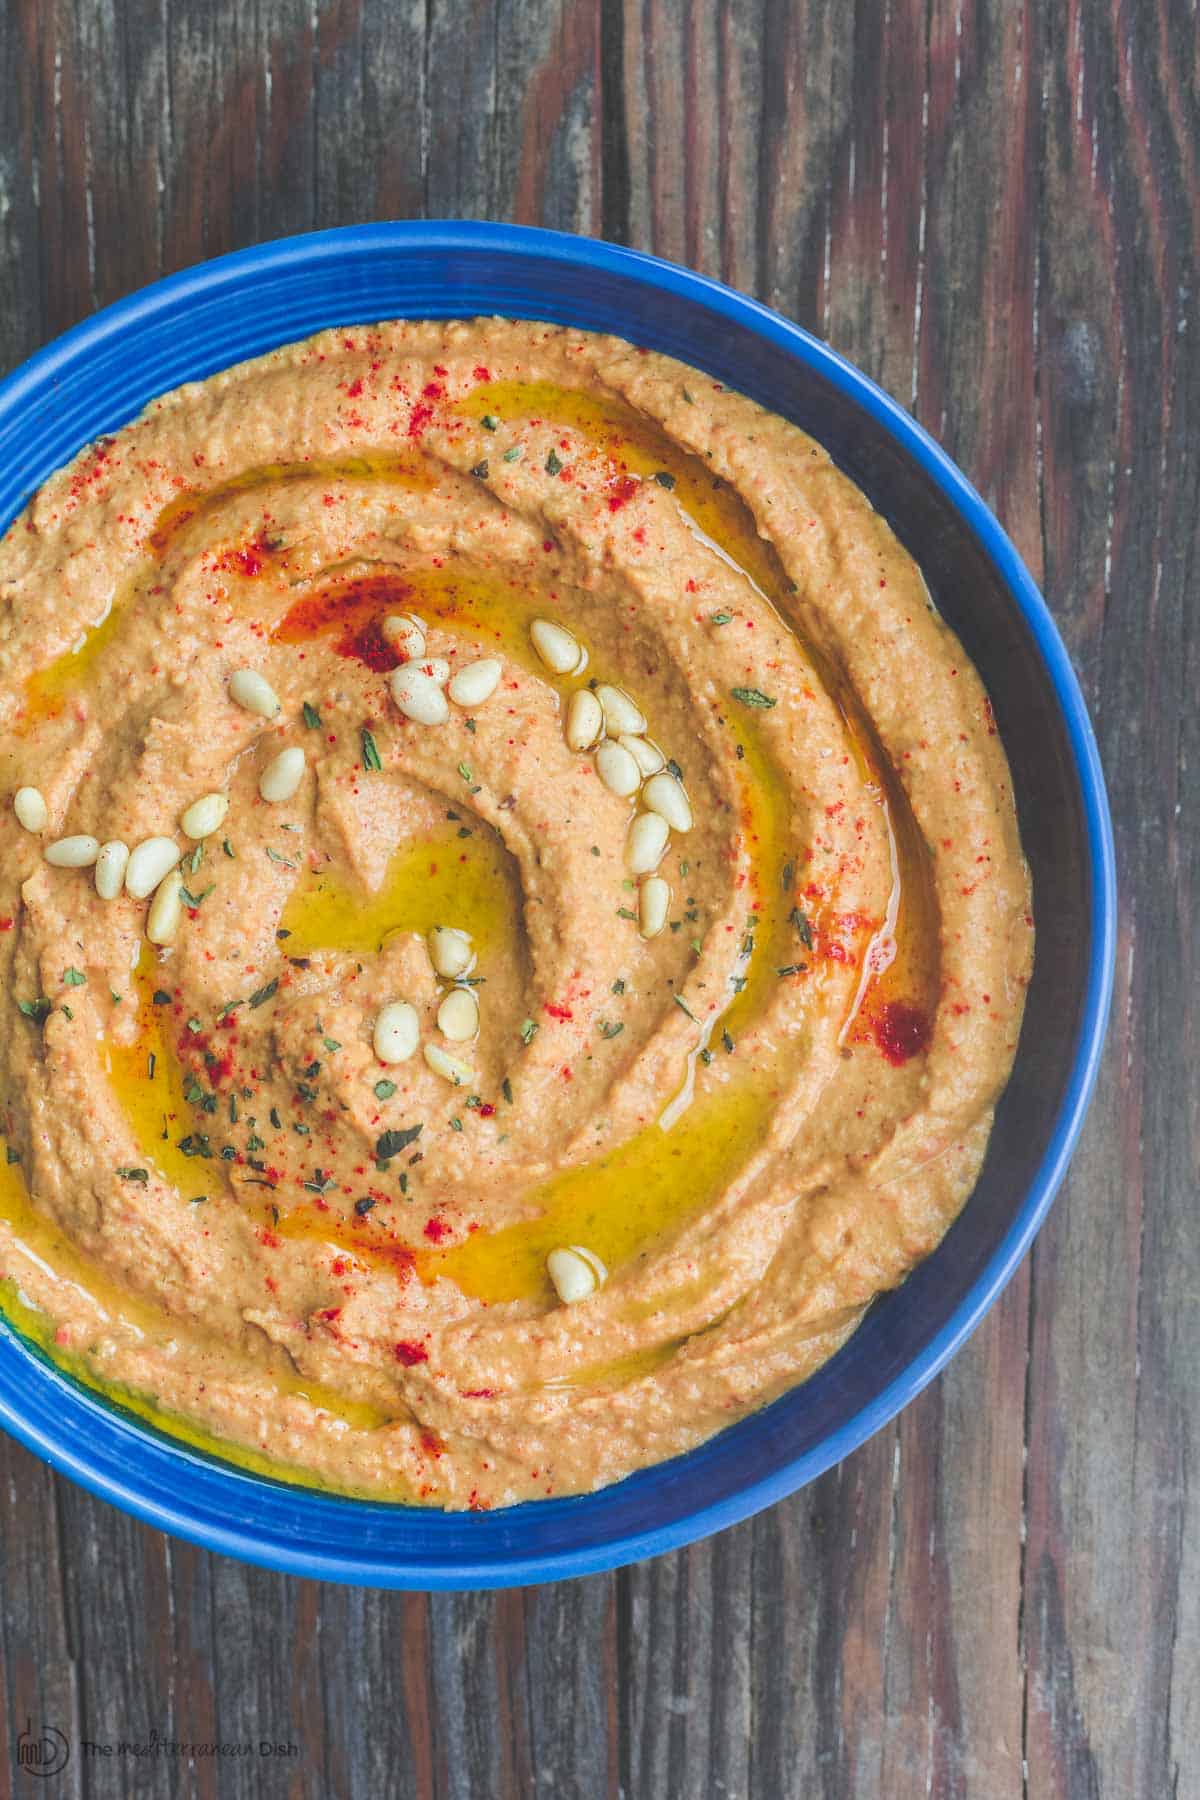 Roasted red pepper hummus with olive oil and pine nuts